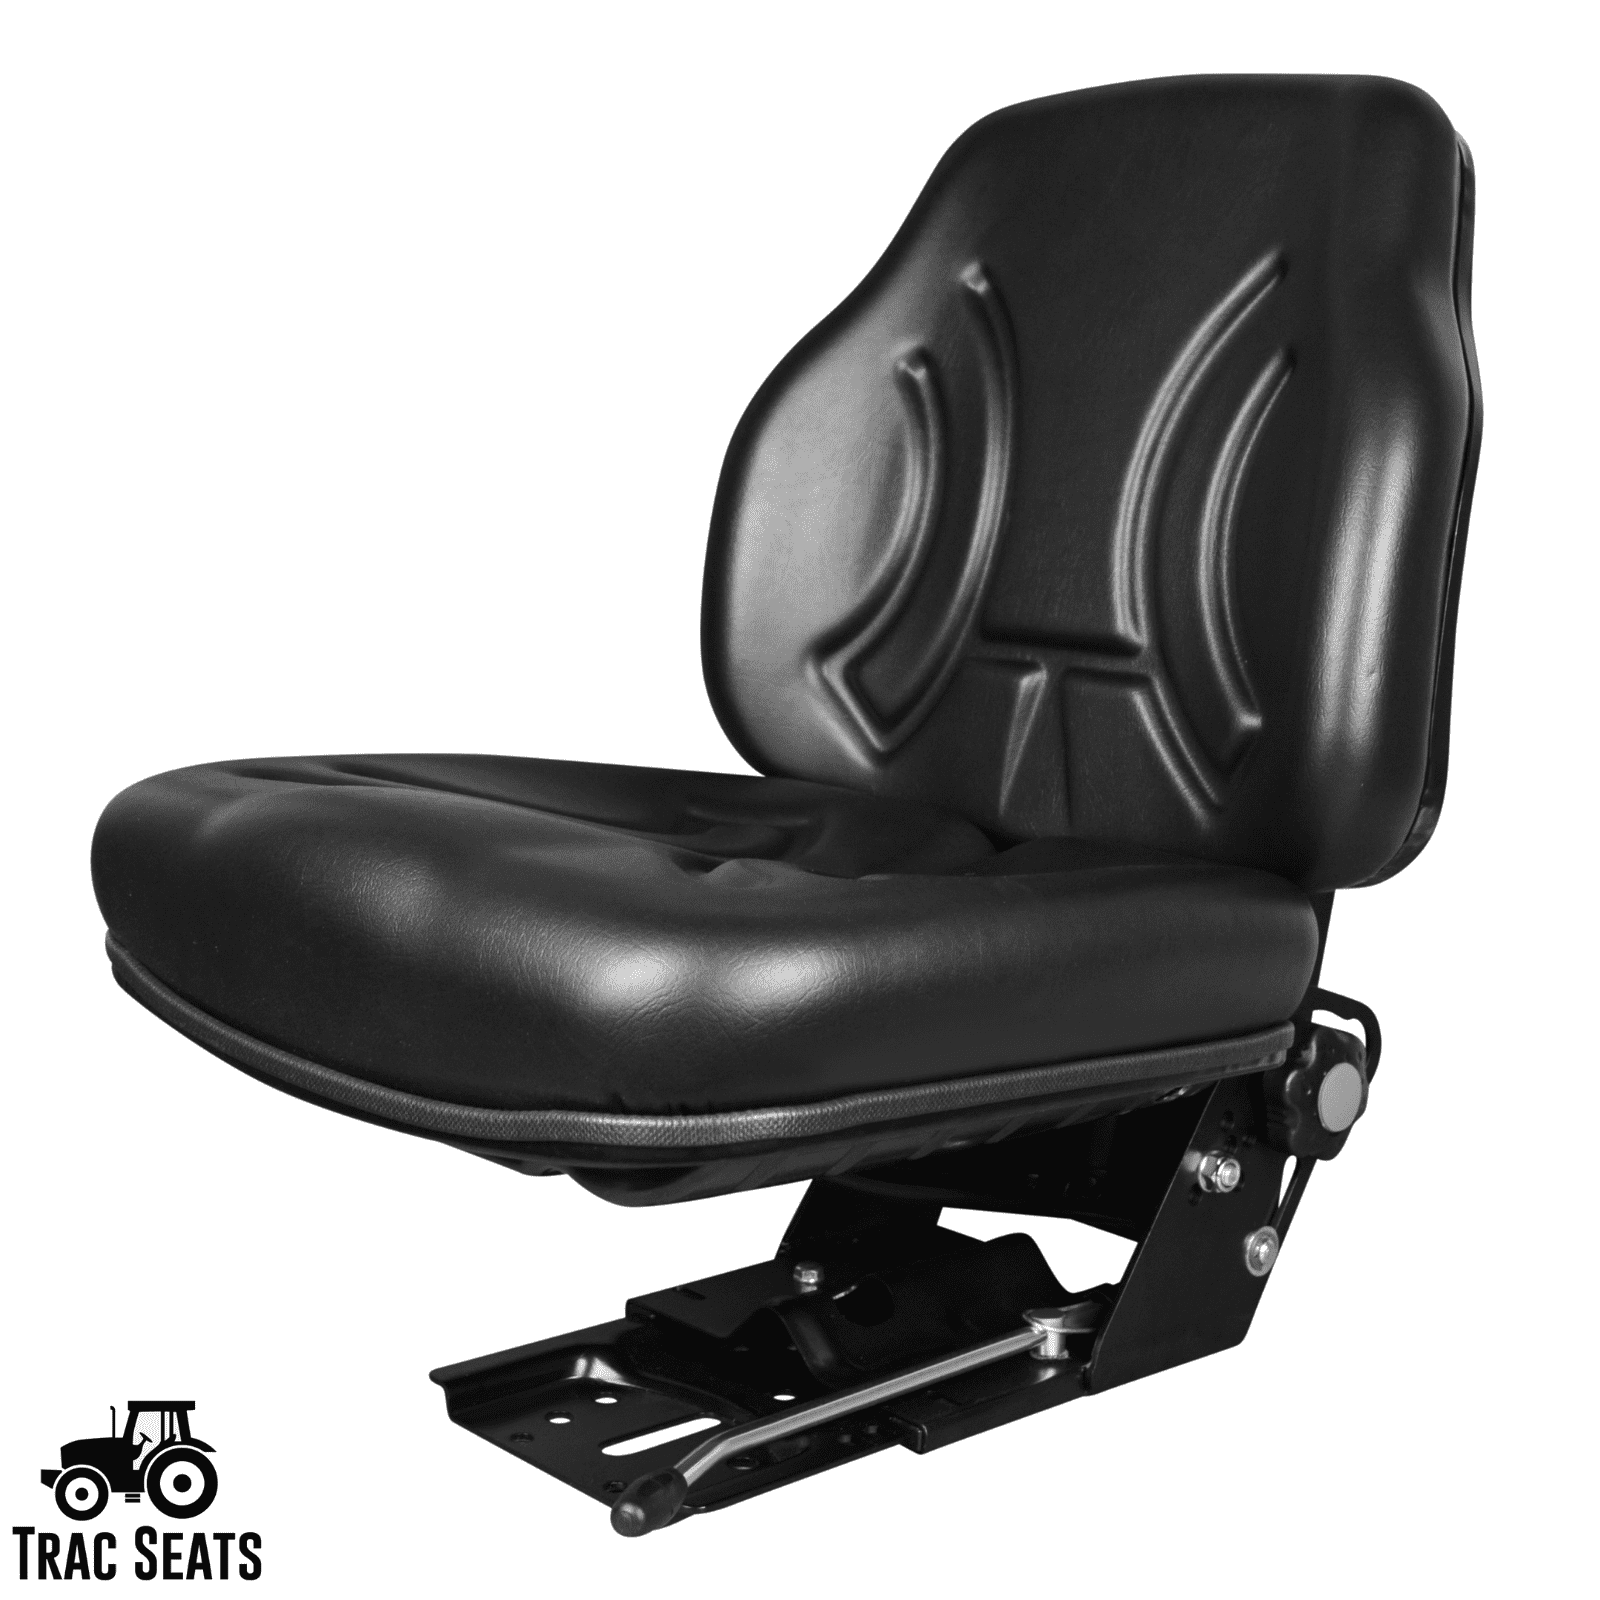 TRAC SEATS Black Suspension Seat for John Deere 5103 5200 5203 5210 5220 Tractor Same Day Shipping